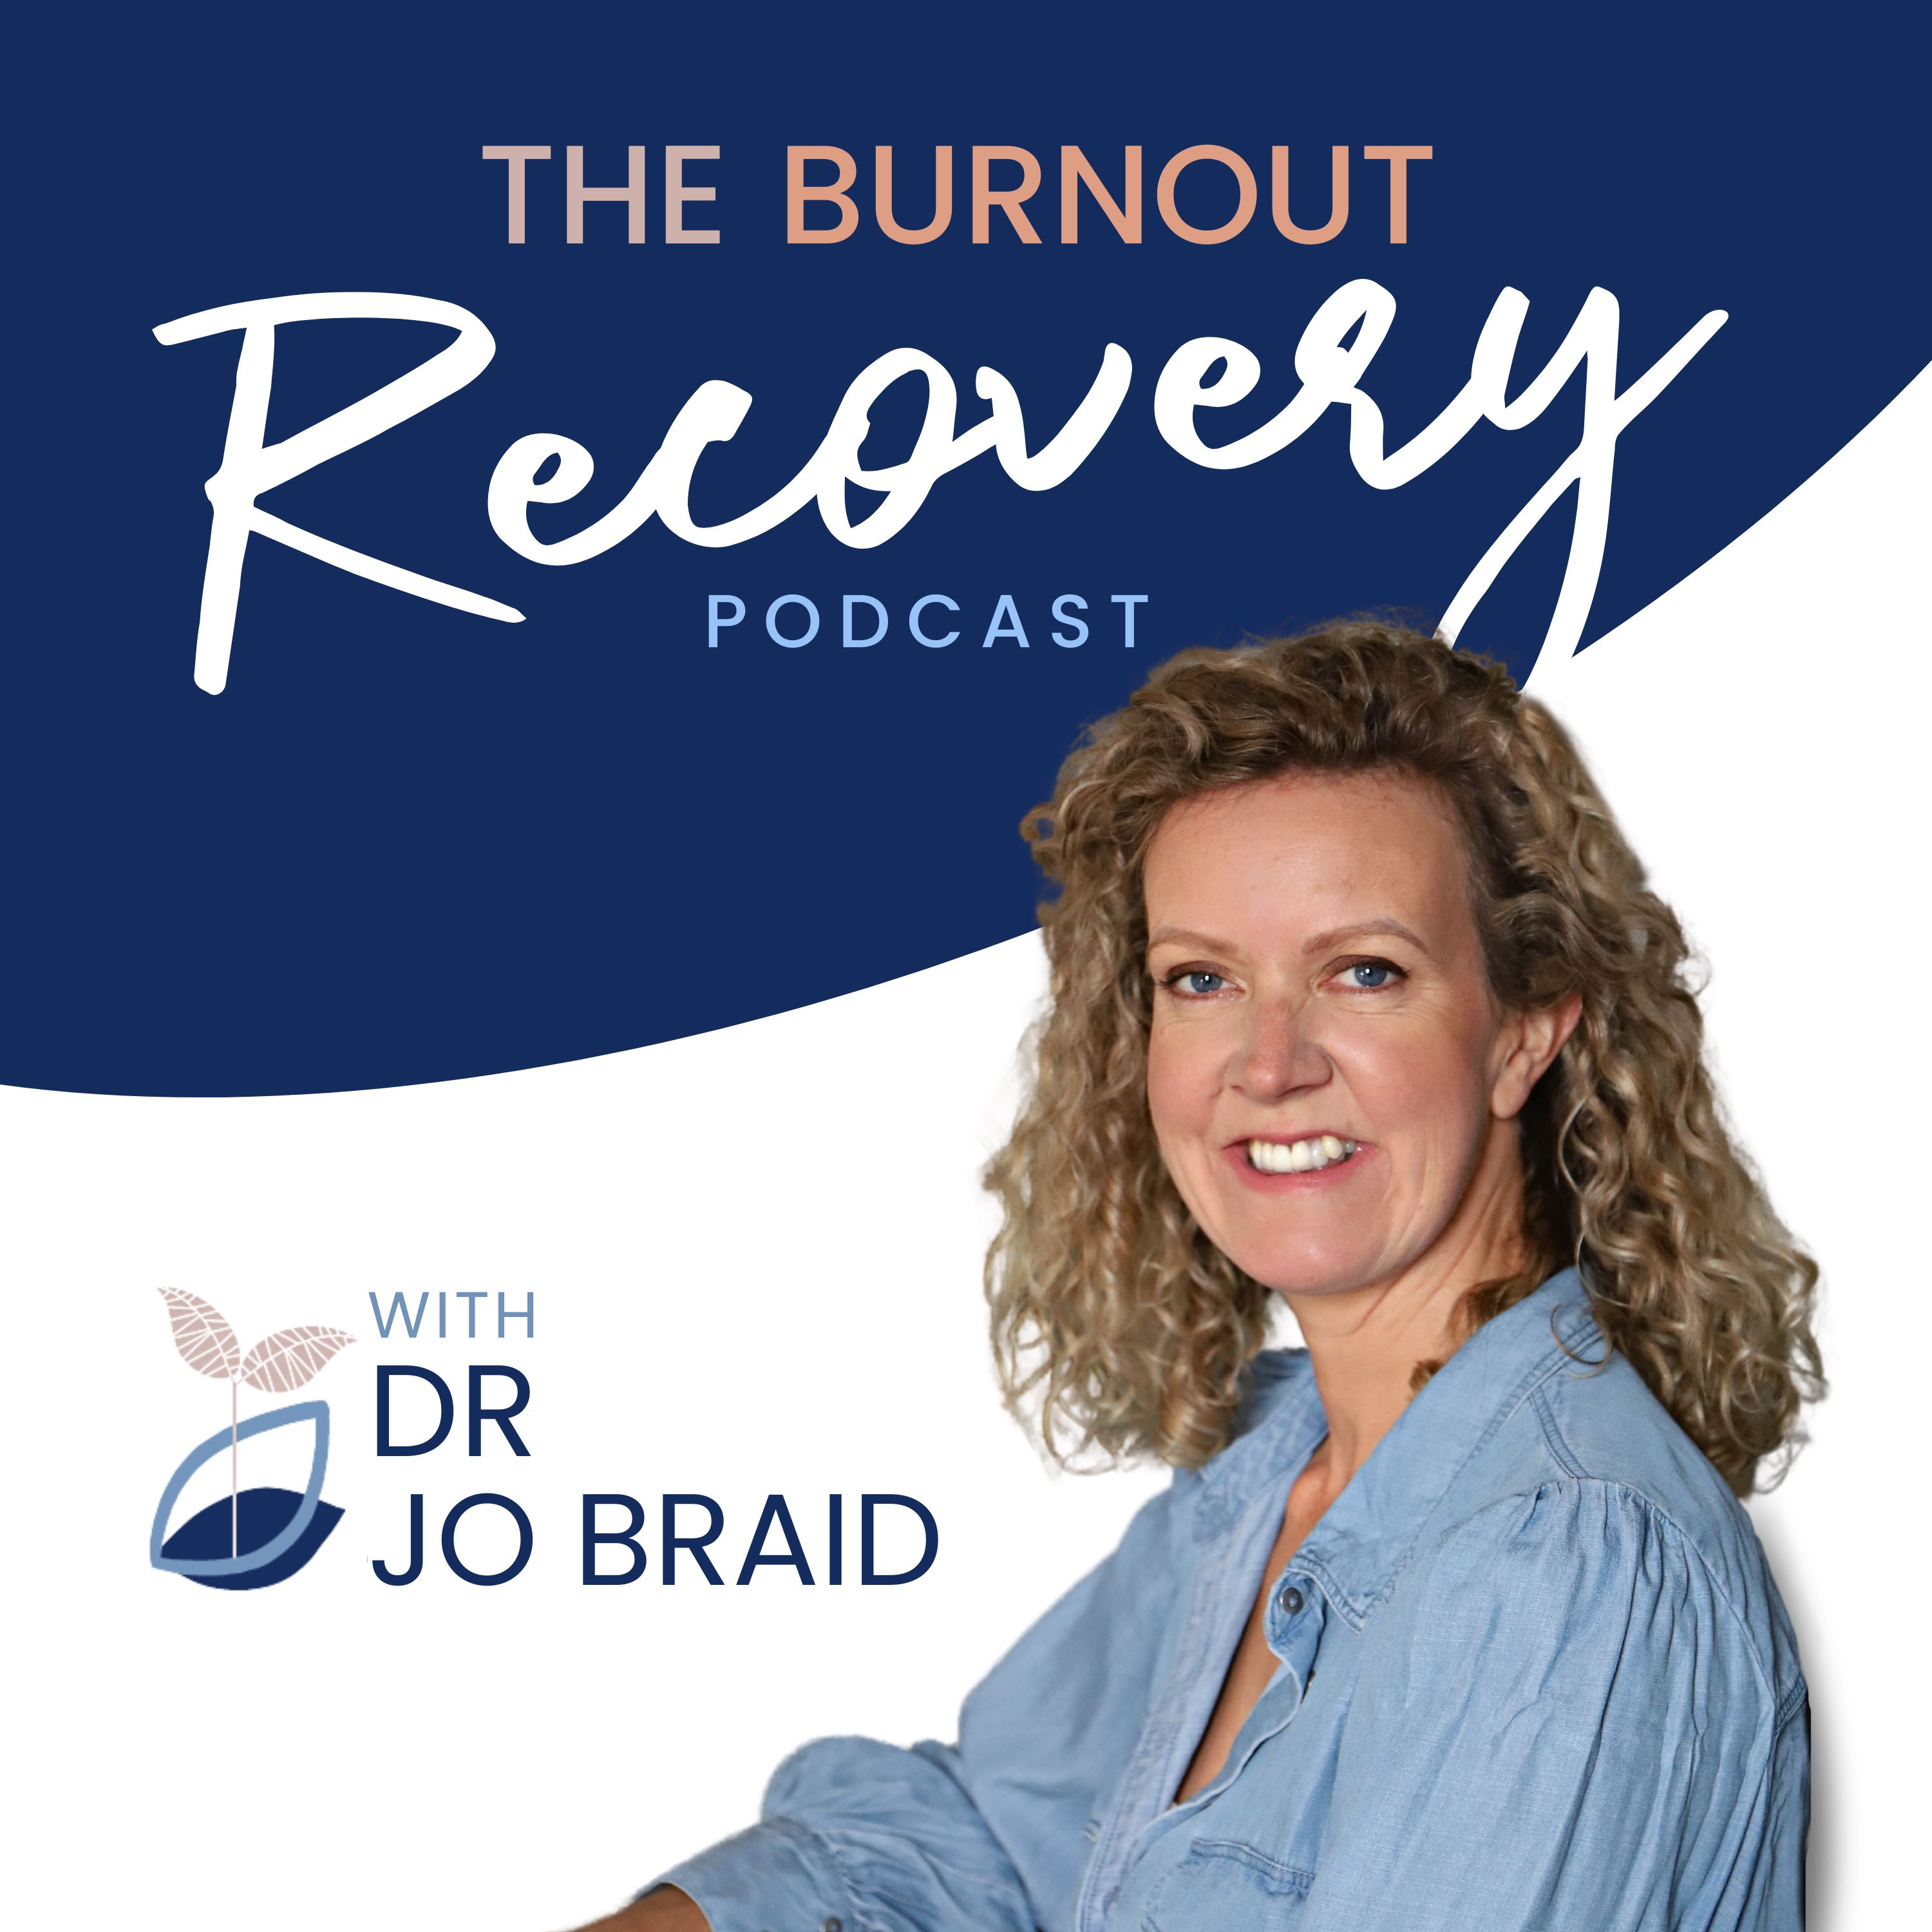 From Burnout Recovery to Retreats for Doctors - interview with Dr Emily Amos